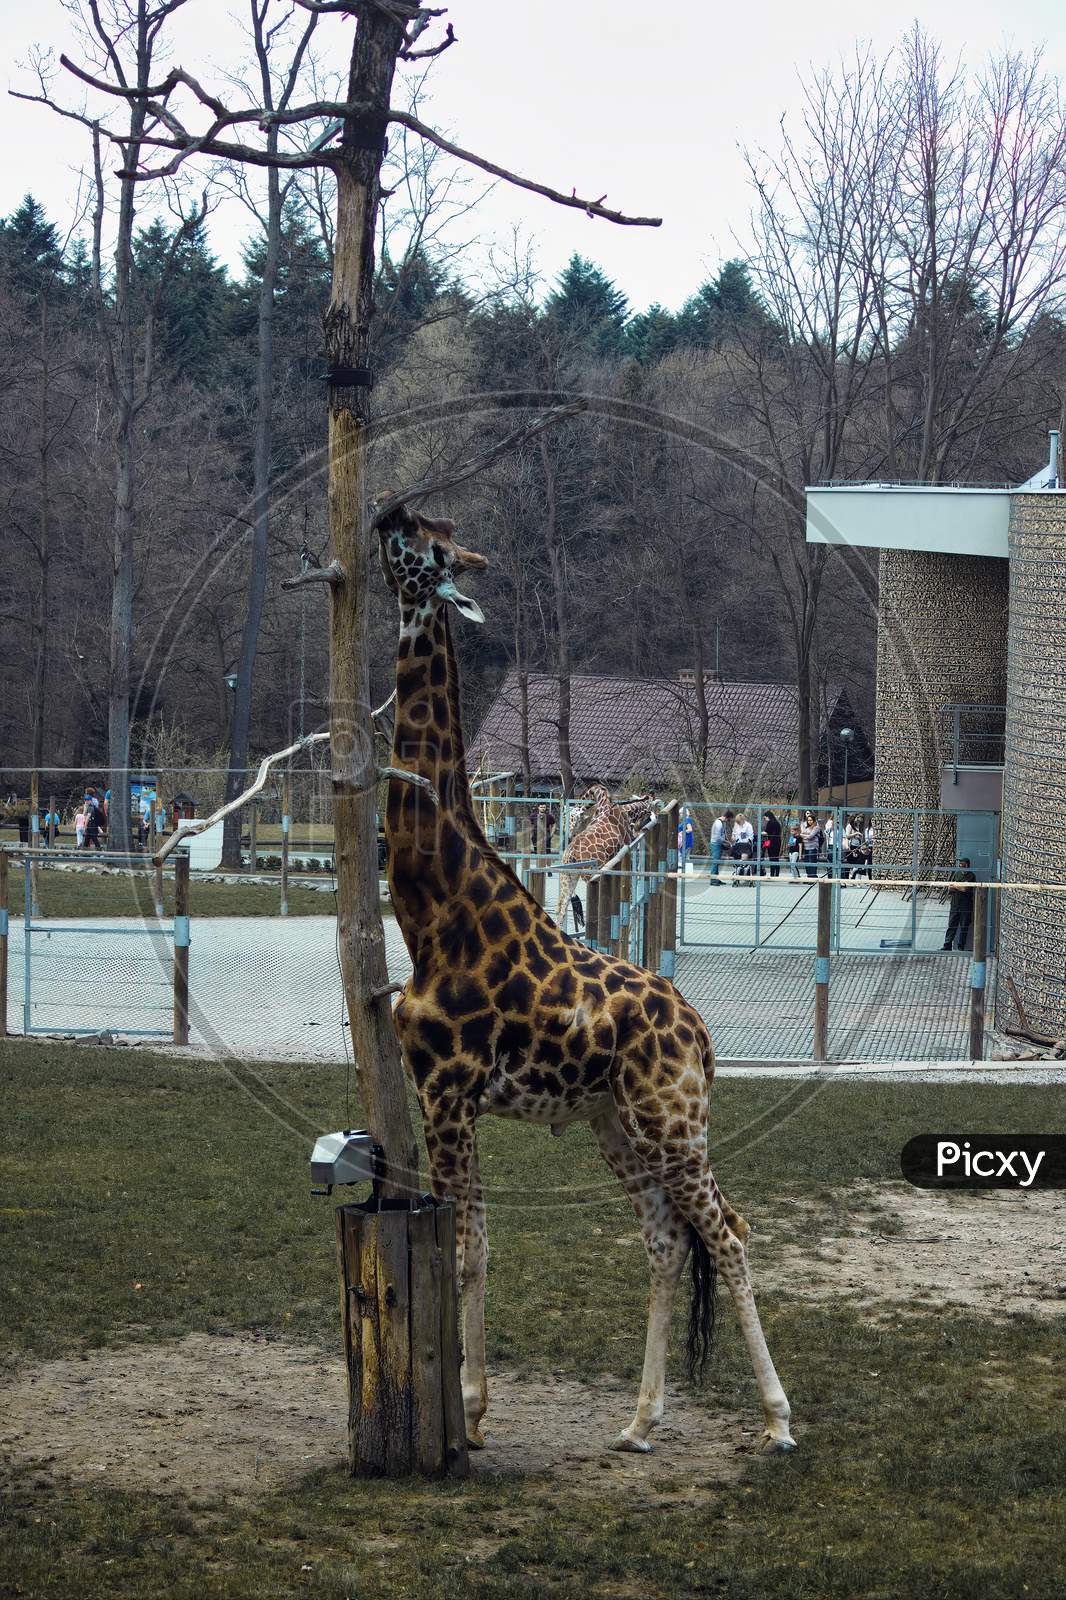 Krakow, Poland: Wide Angle Shot Of A Giraffe Trying To Eat From A Tall Branch Of A Tree N The Zoo Located In Central Europe